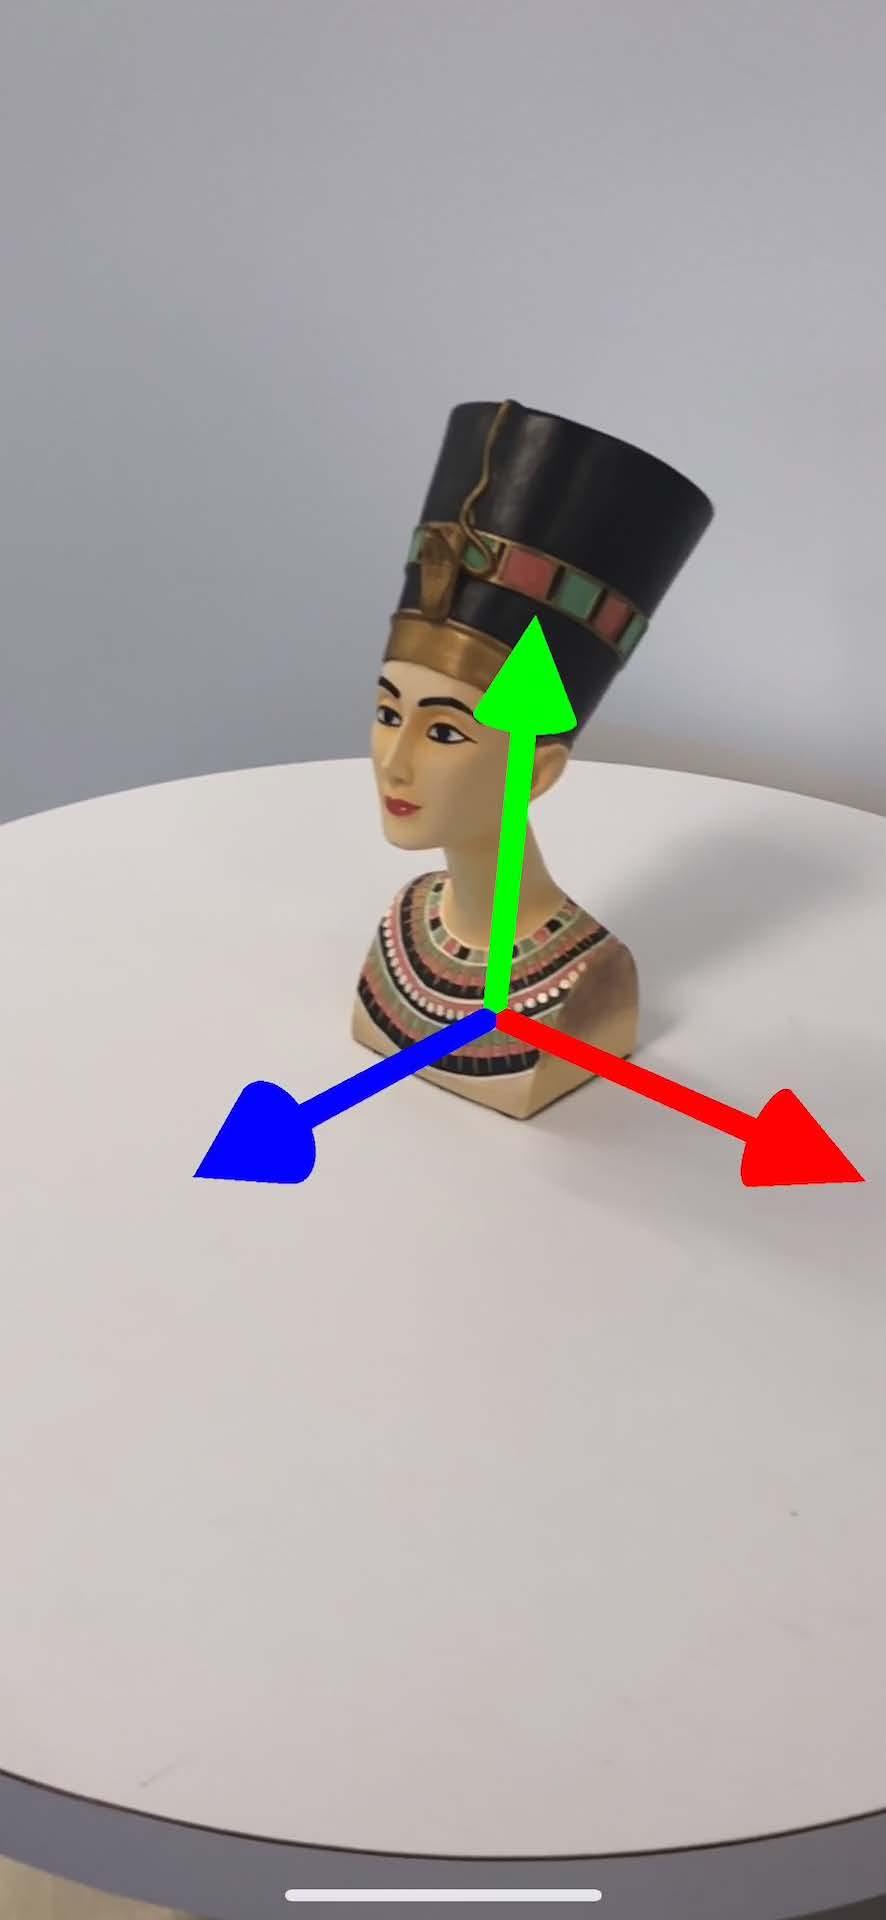 Object Detection Detection of a known static 3D object Objects need to be scanned first